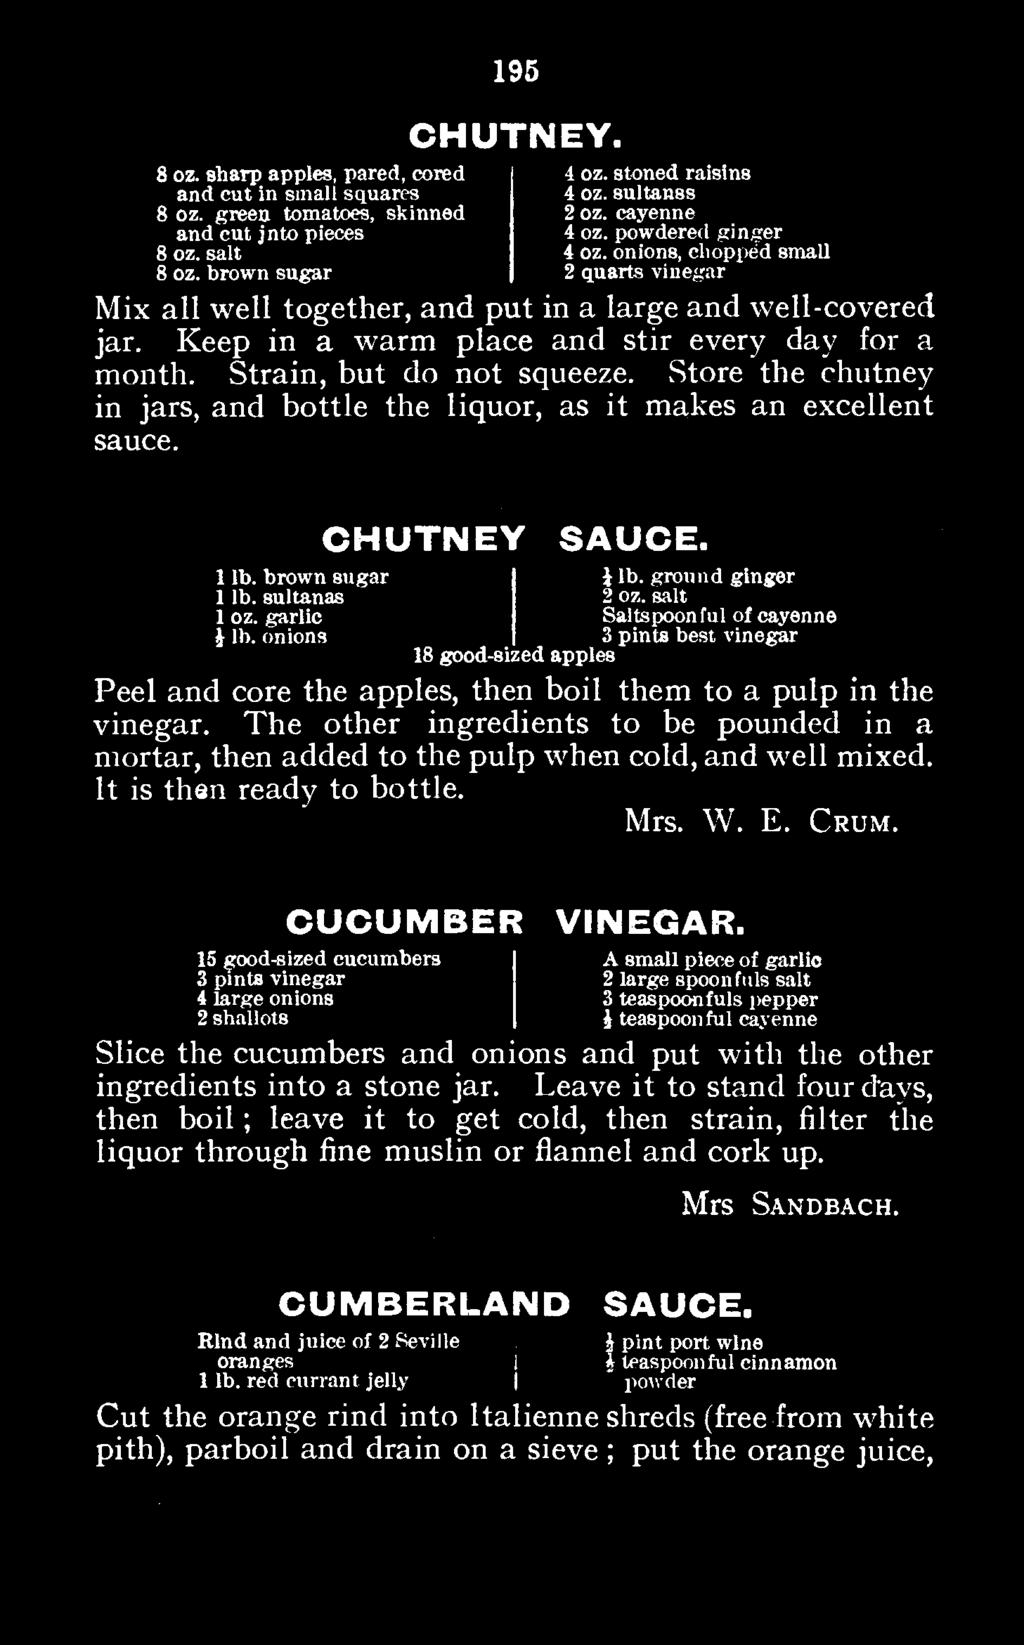 The other ingredients to be pounded in a mortar, then added to the pulp when cold, and well mixed. It is then ready to bottle. Mrs. W. E. Crum. CUCUMBER VINEGAR.